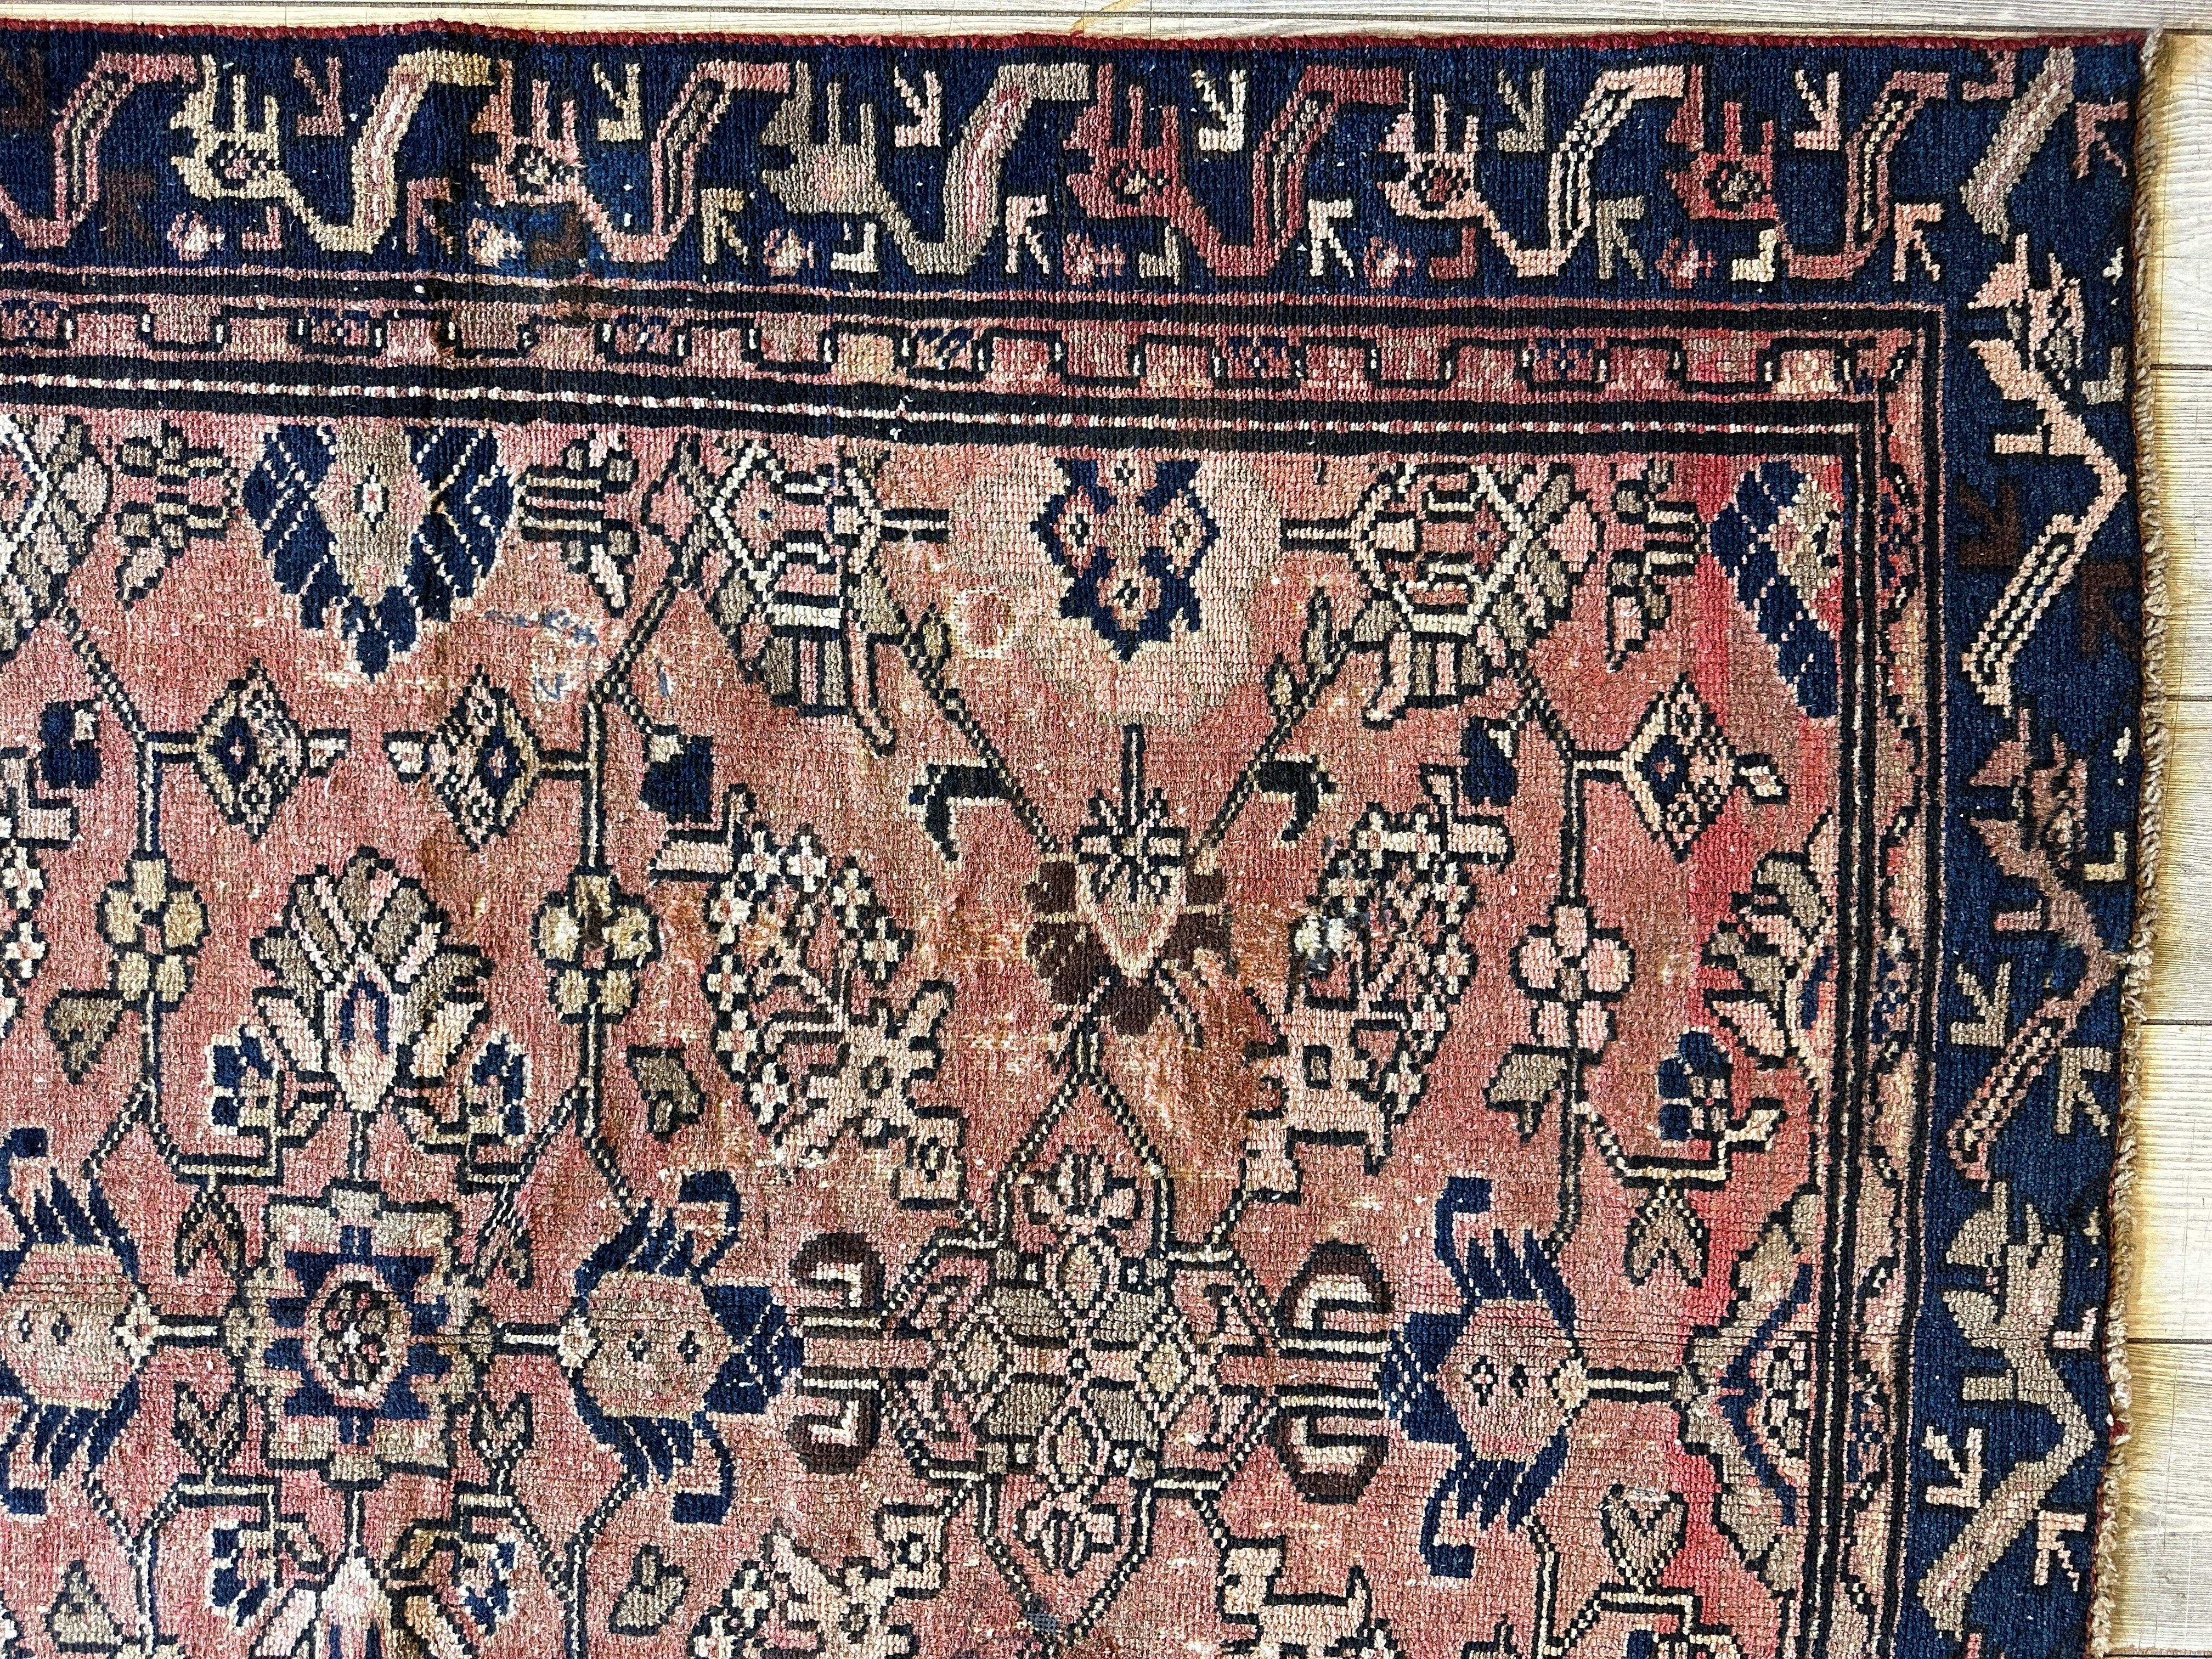 4' 4 x 9' 3 Hand Knotted Ultra Vintage Persian Wool Runner Rug